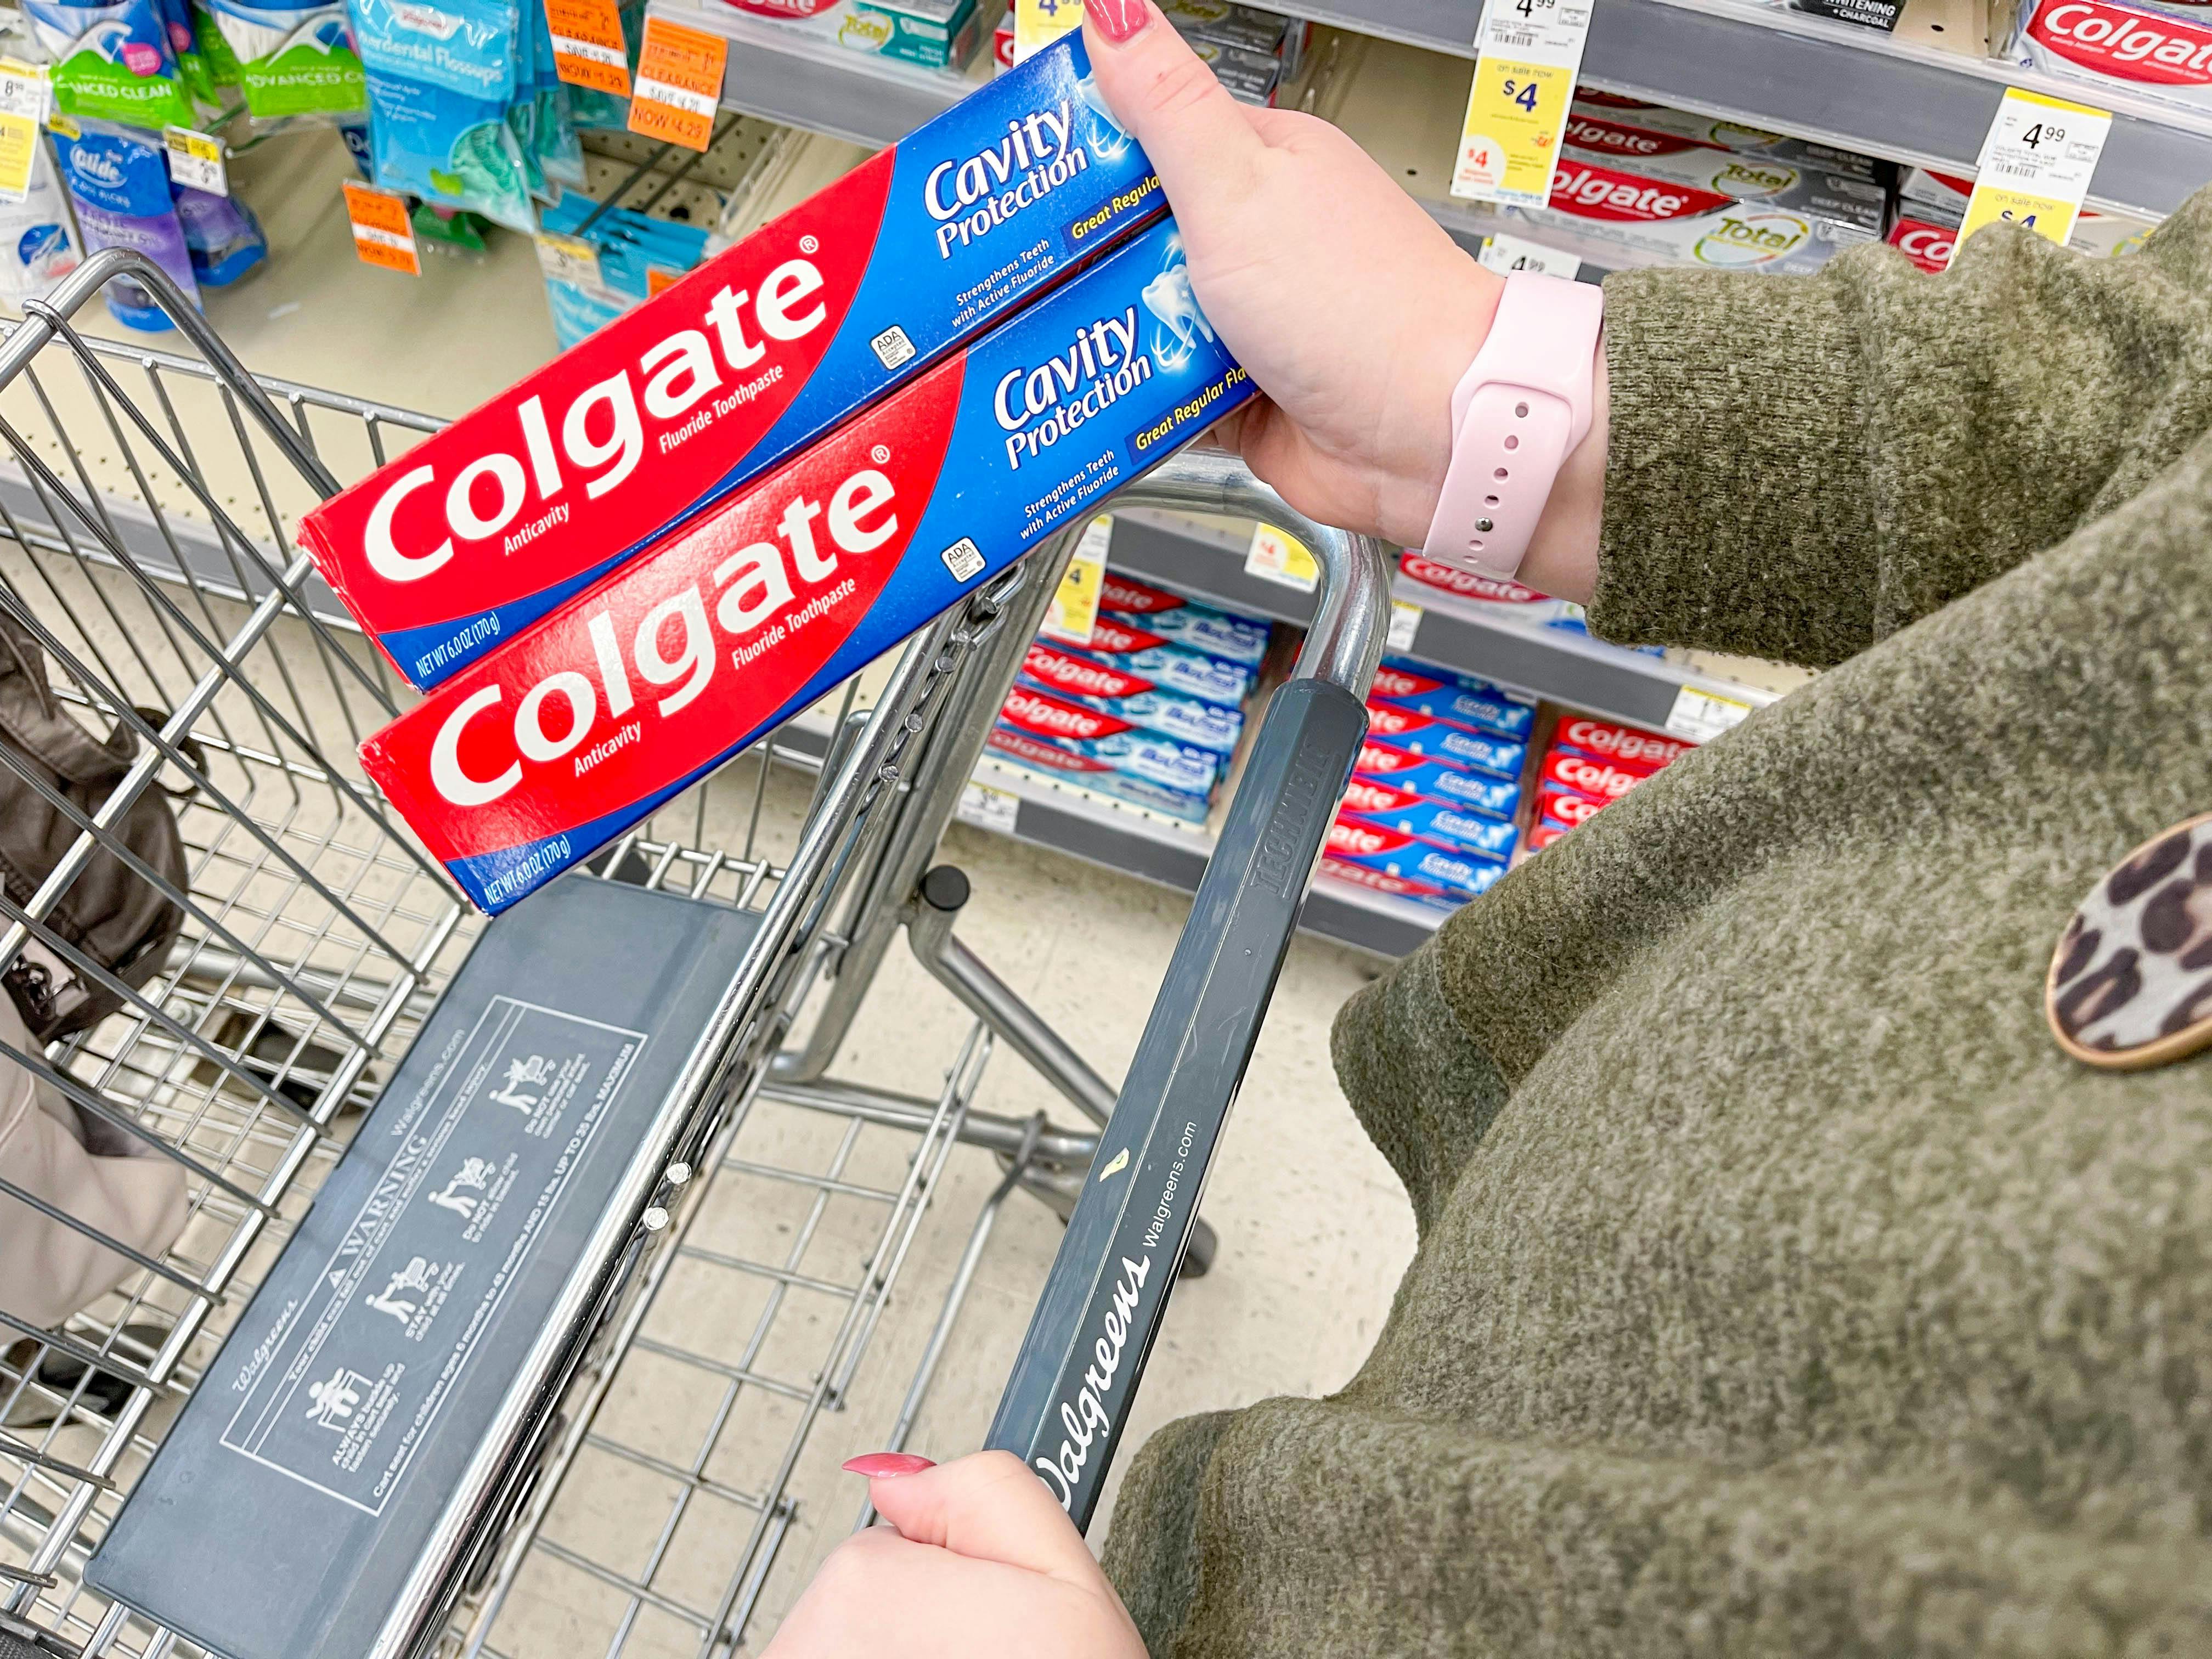 holding colgate toothpaste and putting in walgreens cart